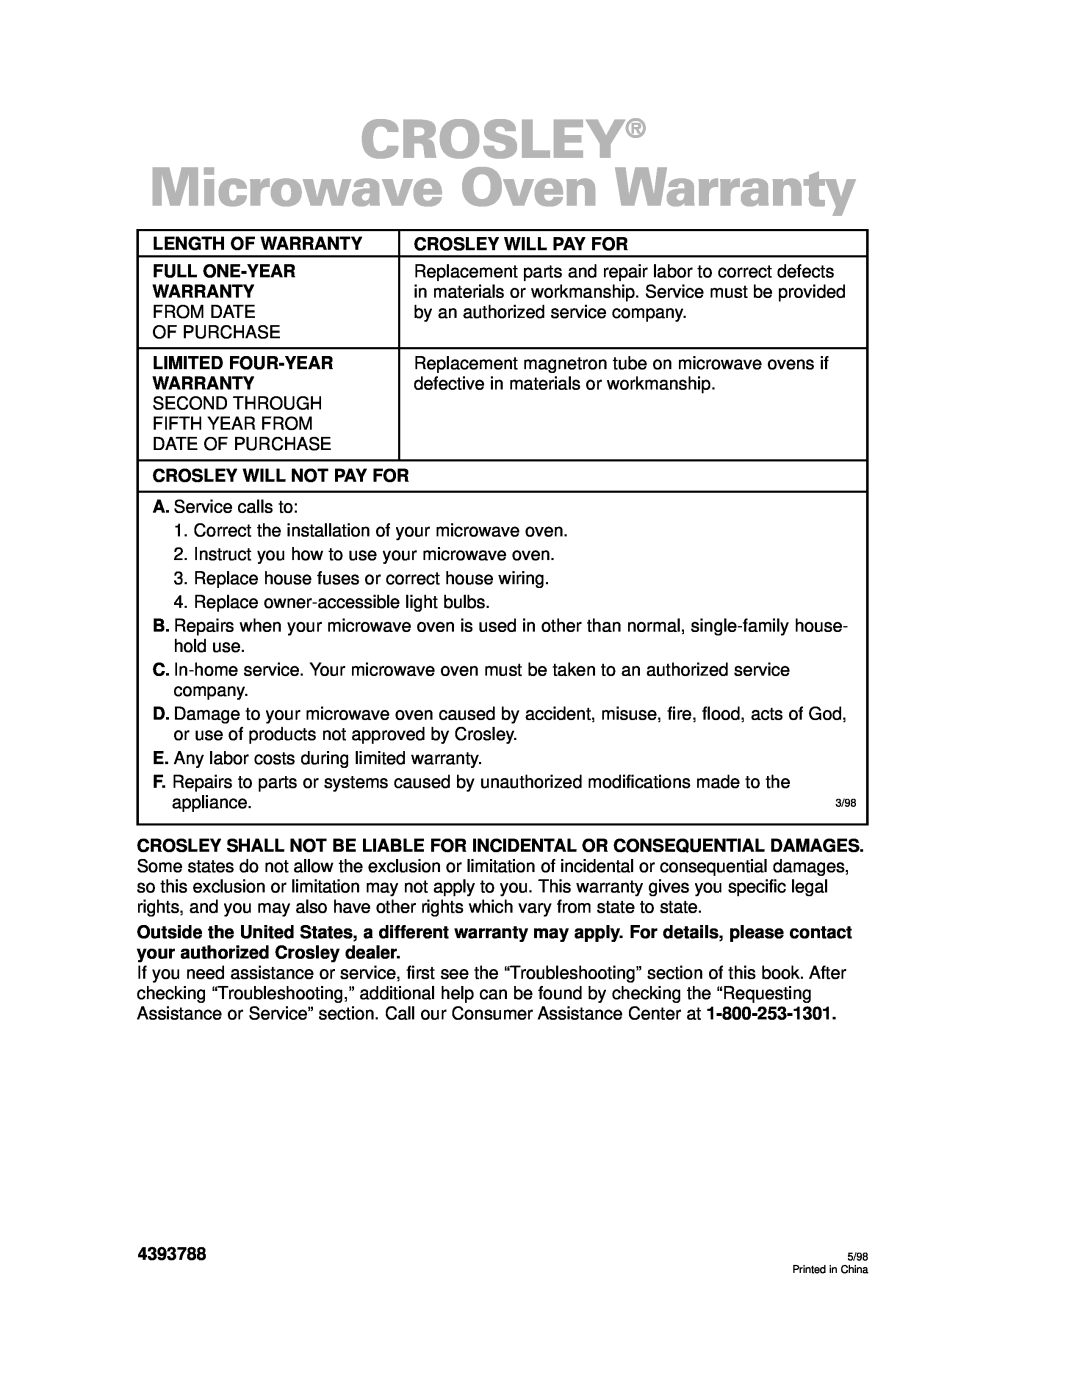 Whirlpool CMT102SG installation instructions CROSLEY Microwave Oven Warranty 